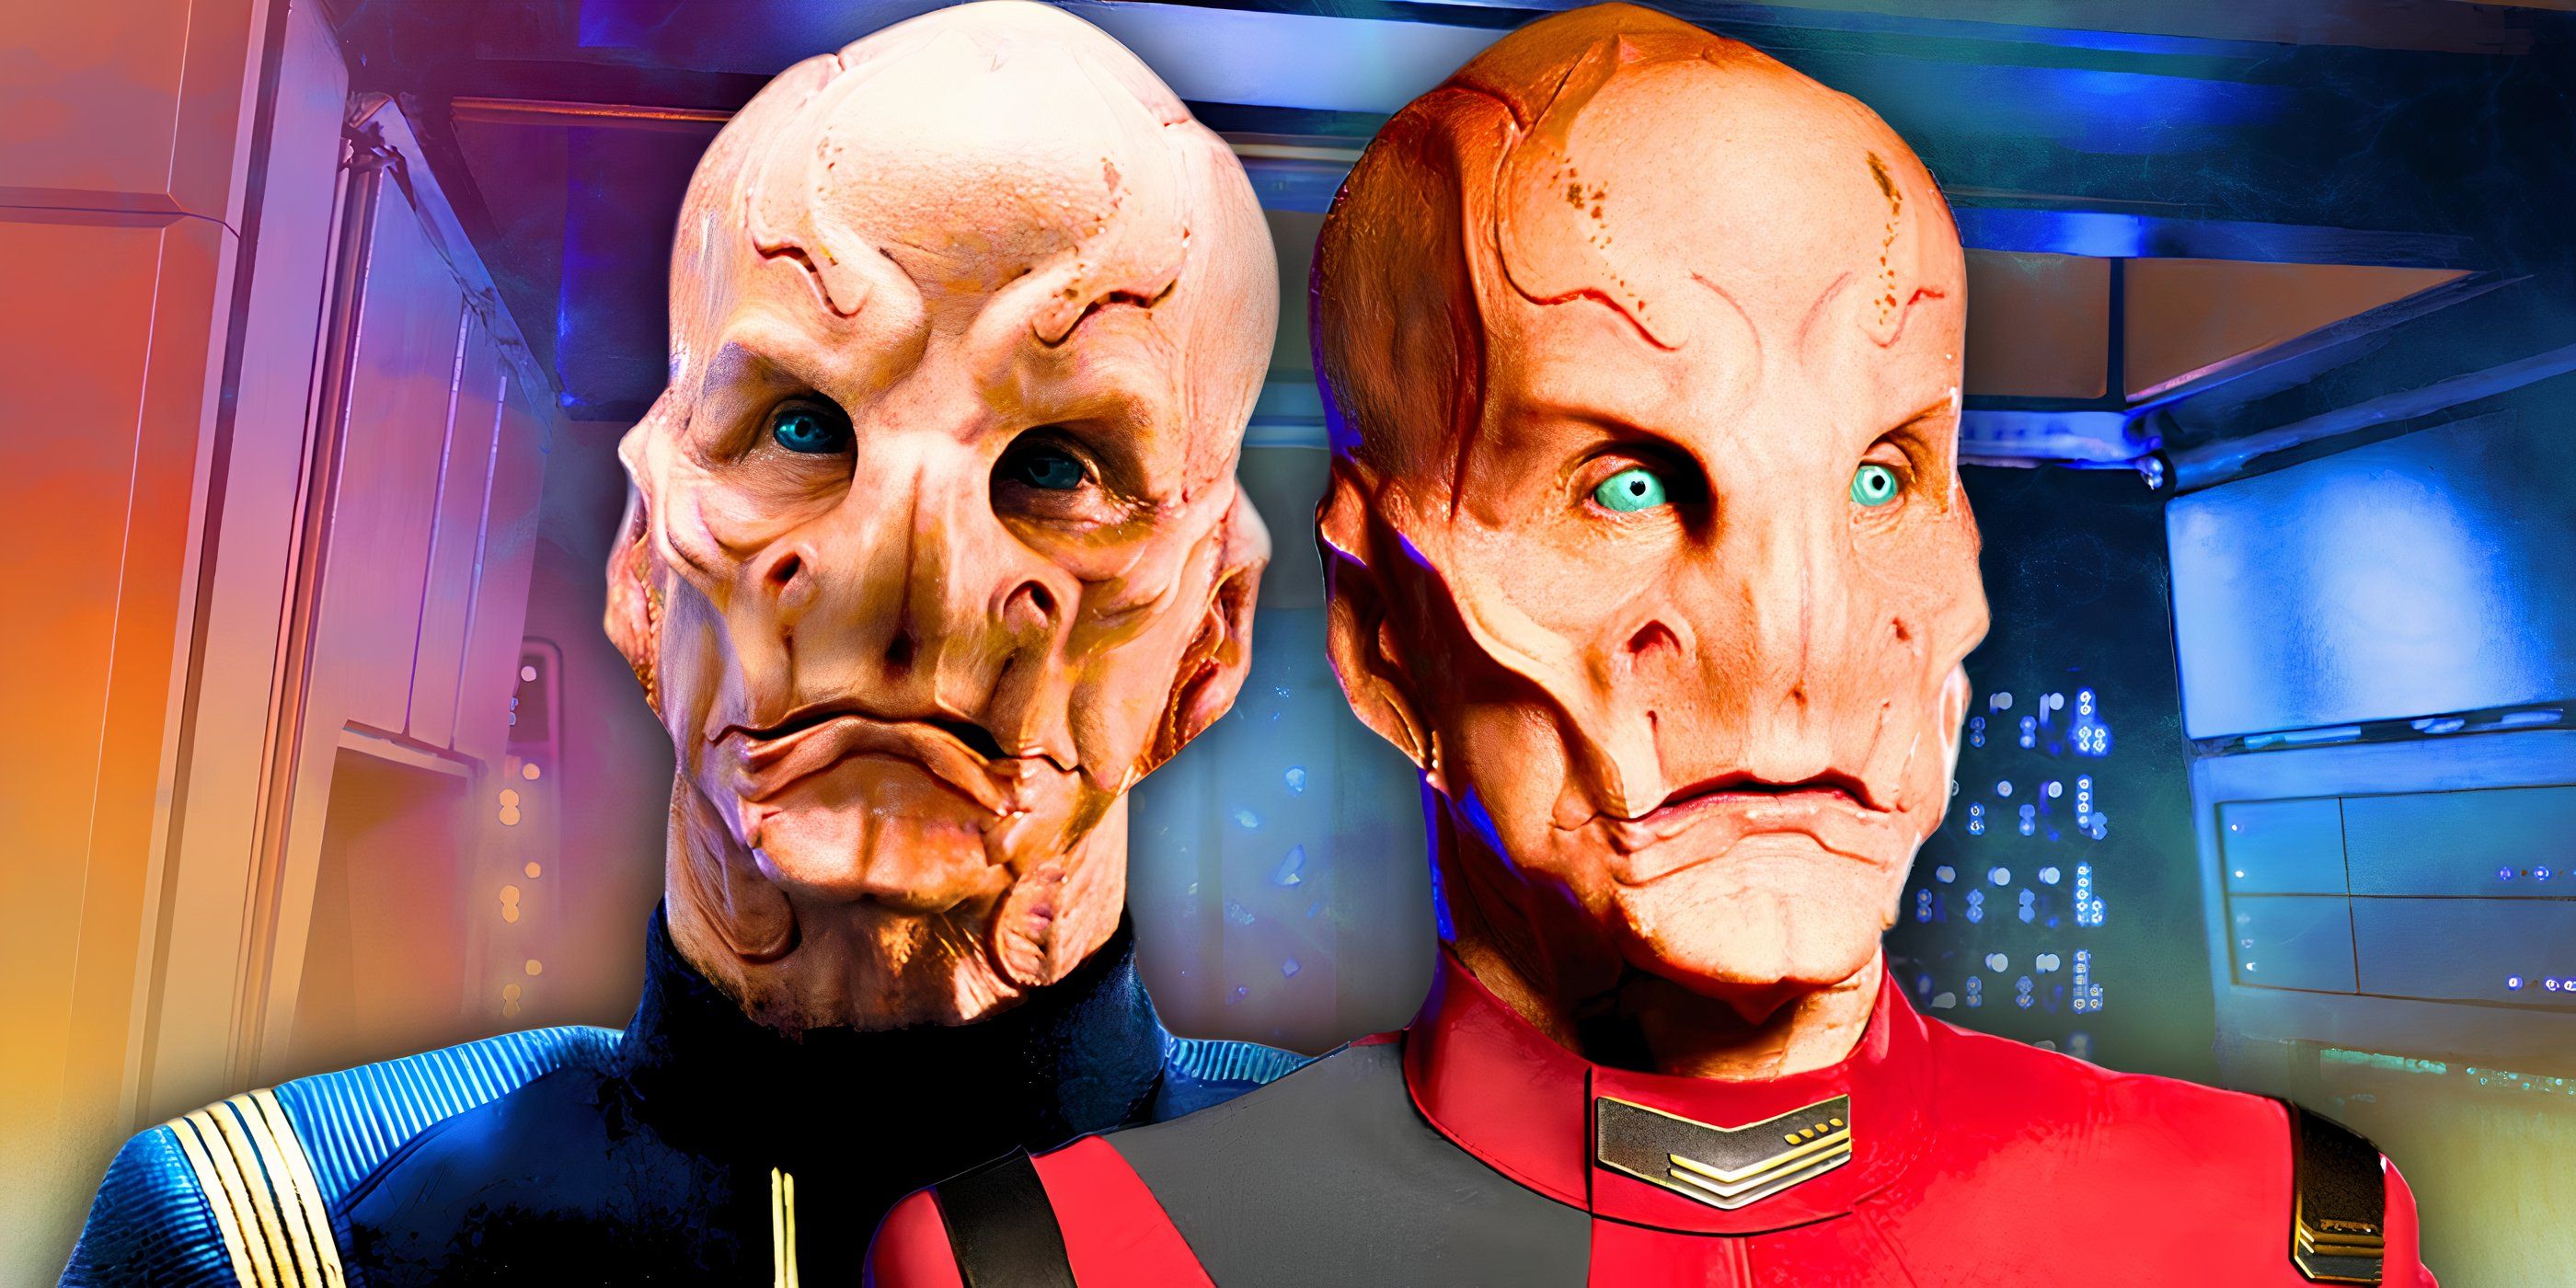 Two images of Doug Jones as Saru from Star Trek: Discovery, from season 1 and season 5 respectively.